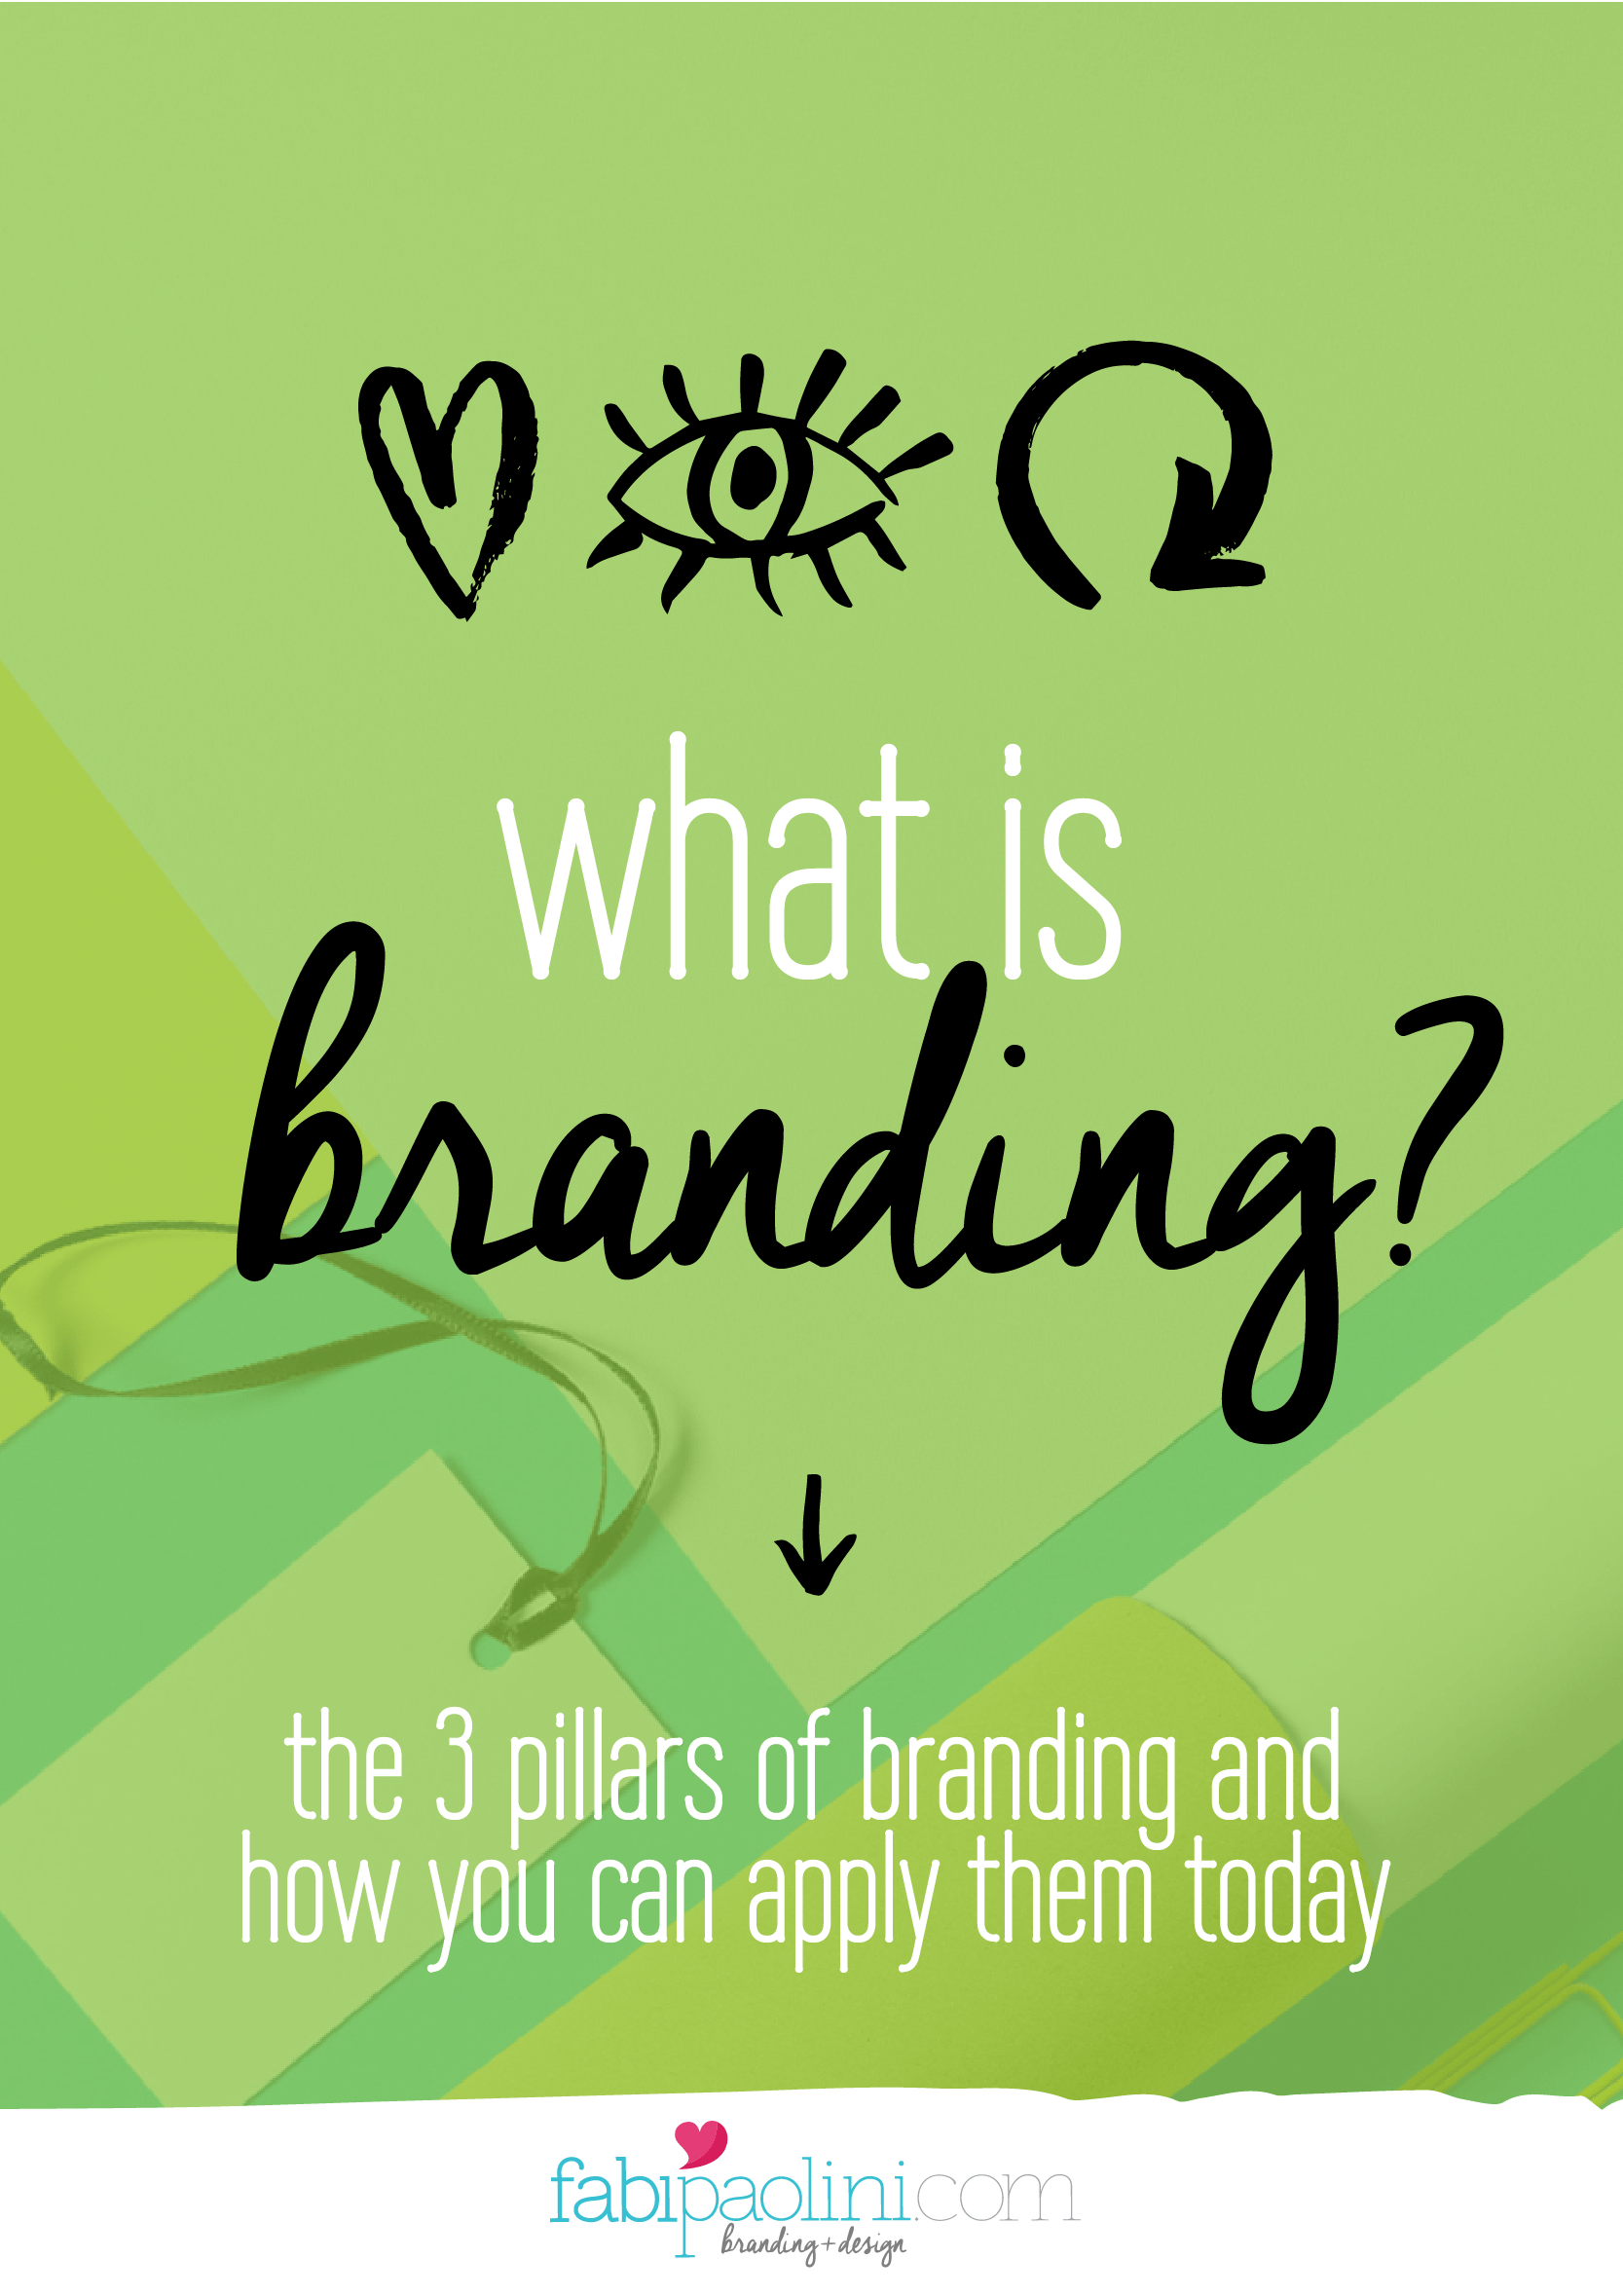 What is branding? The 3 pillars of branding: brand foundation, brand identity and brand experience